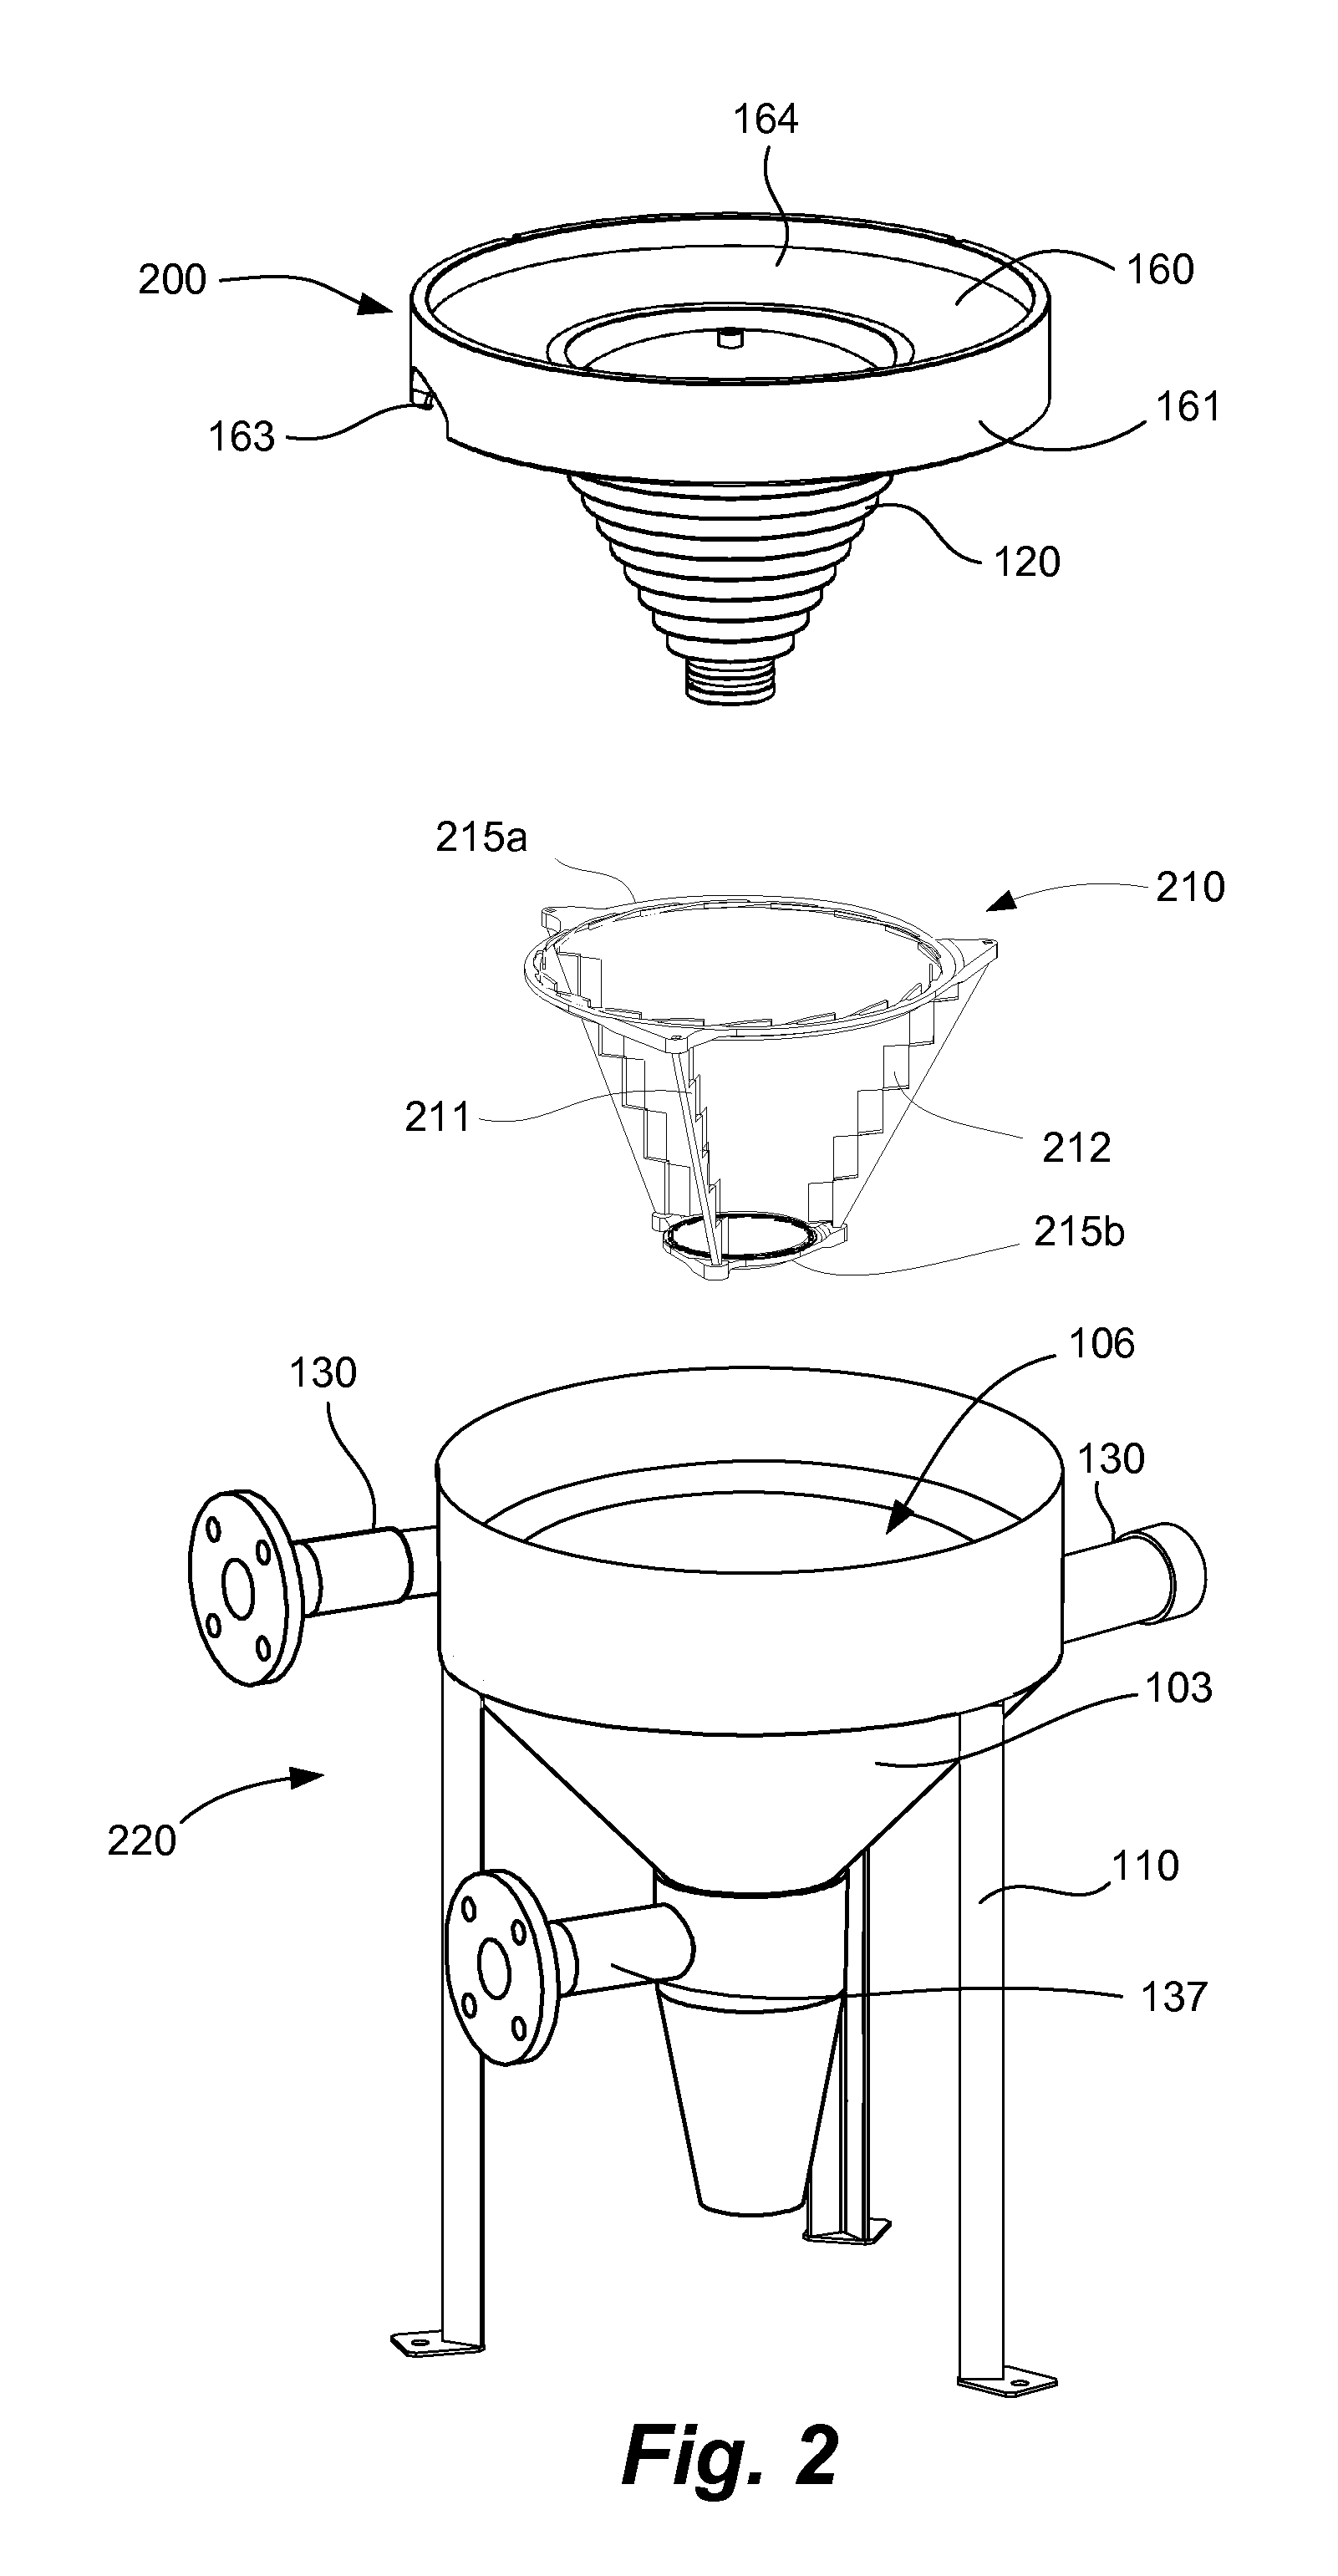 Cleaning assembly for use in fluid filtration systems